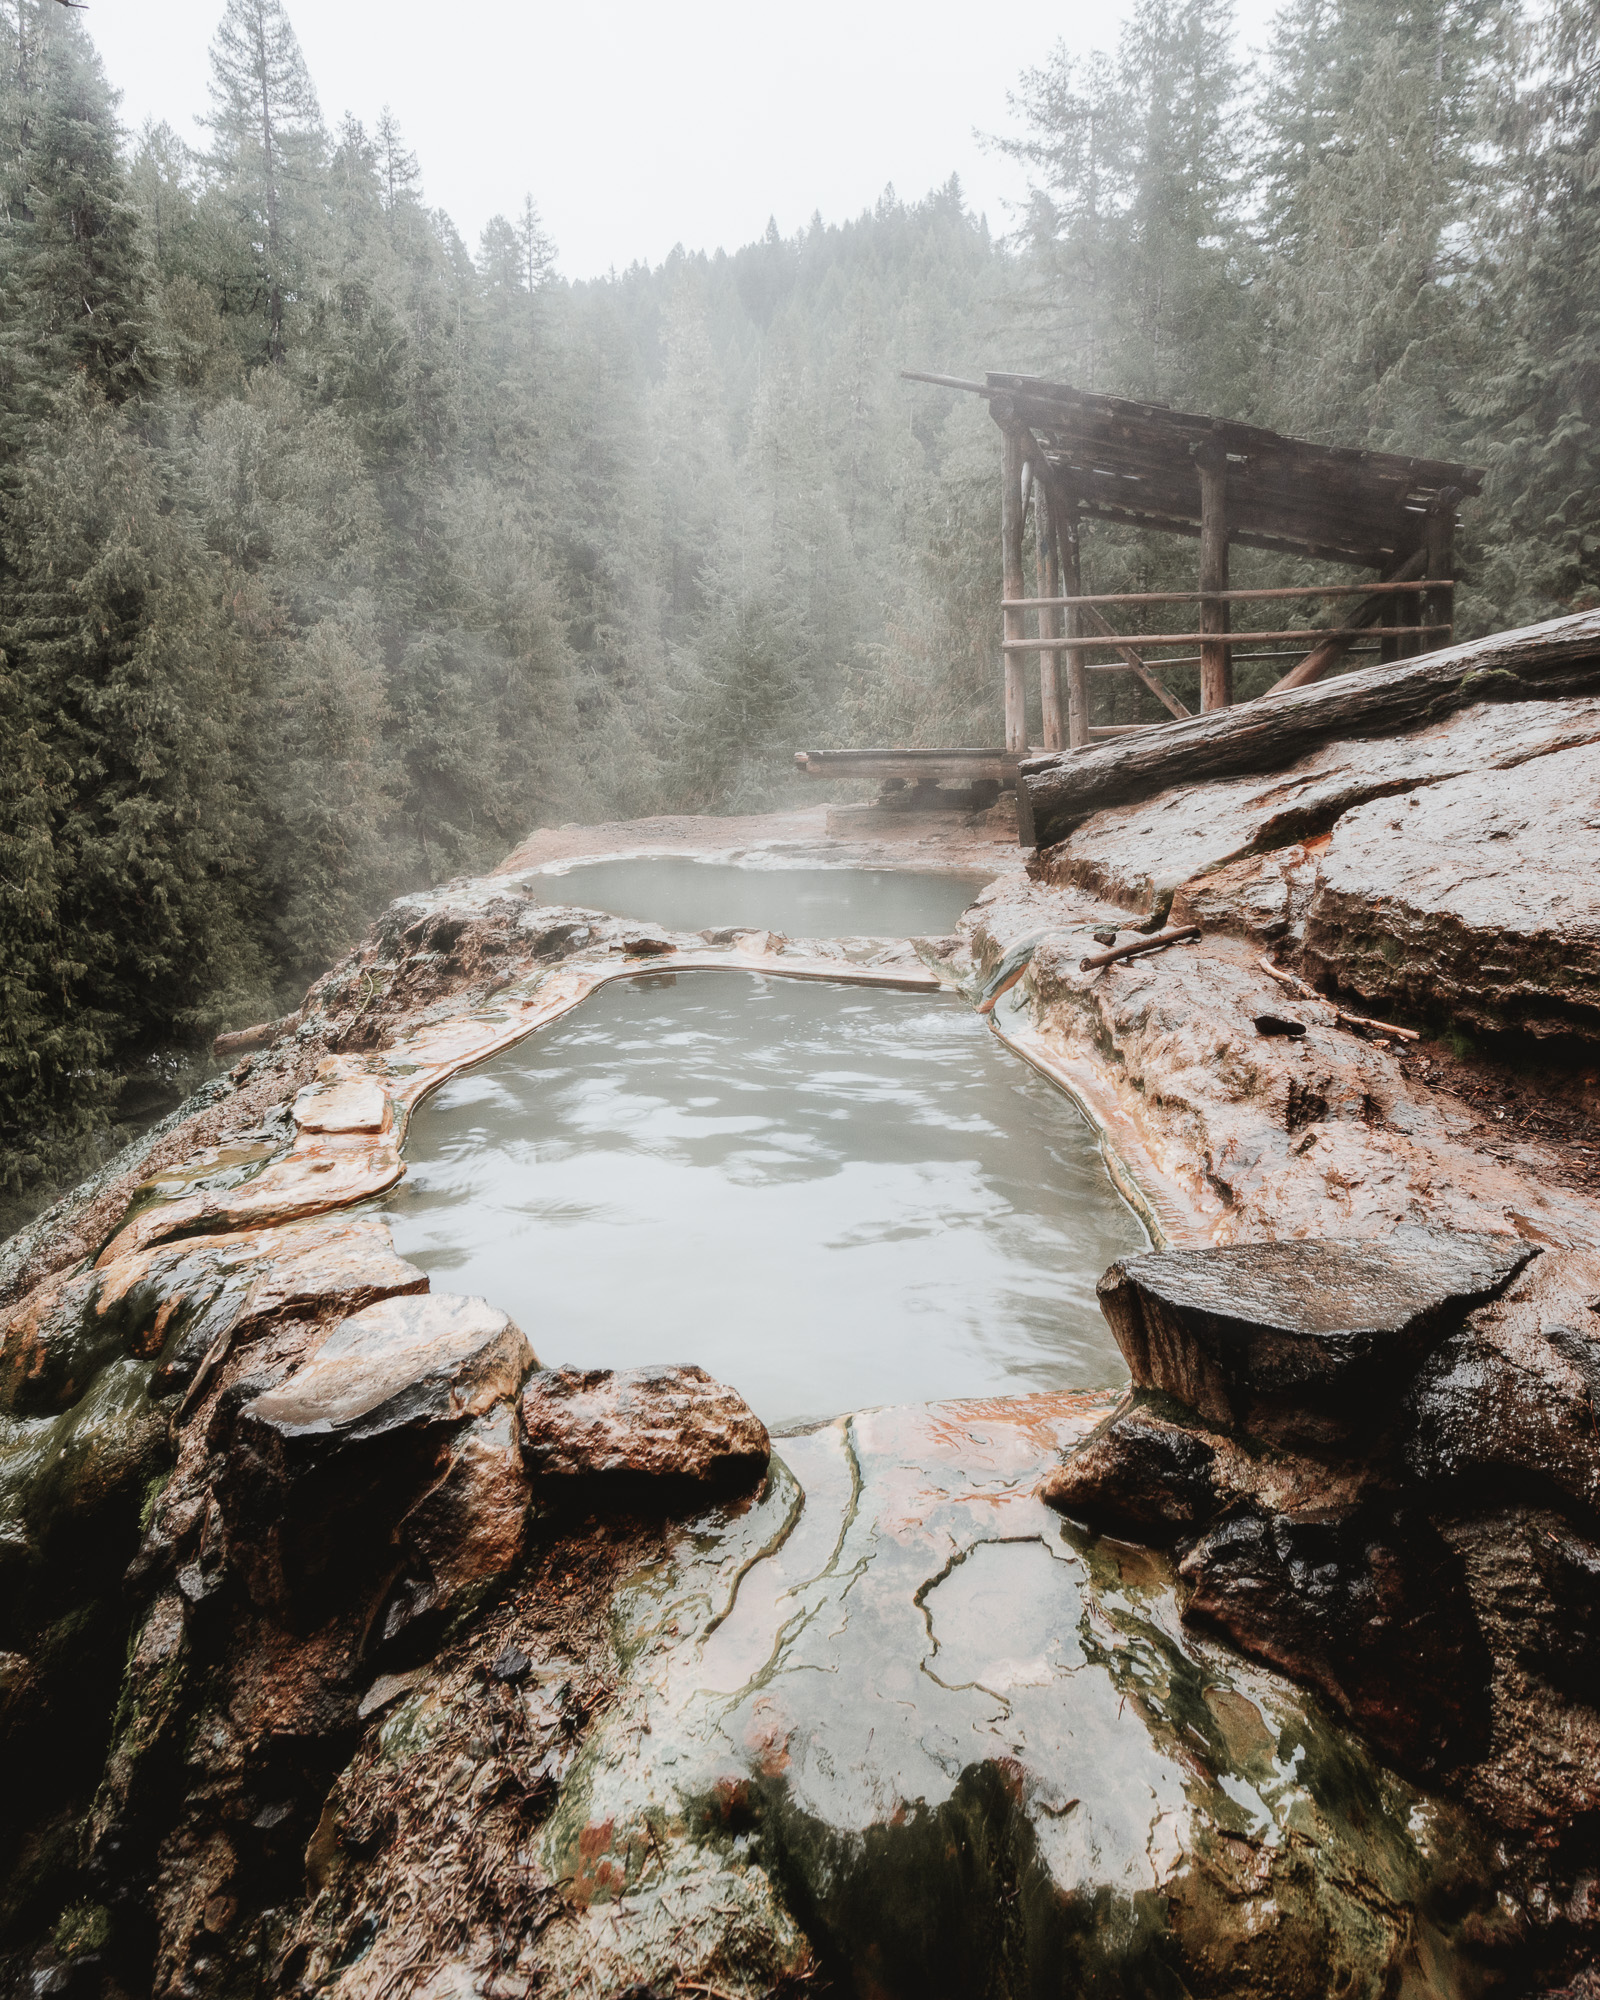 Mystical hot spring in the woods in Oregon